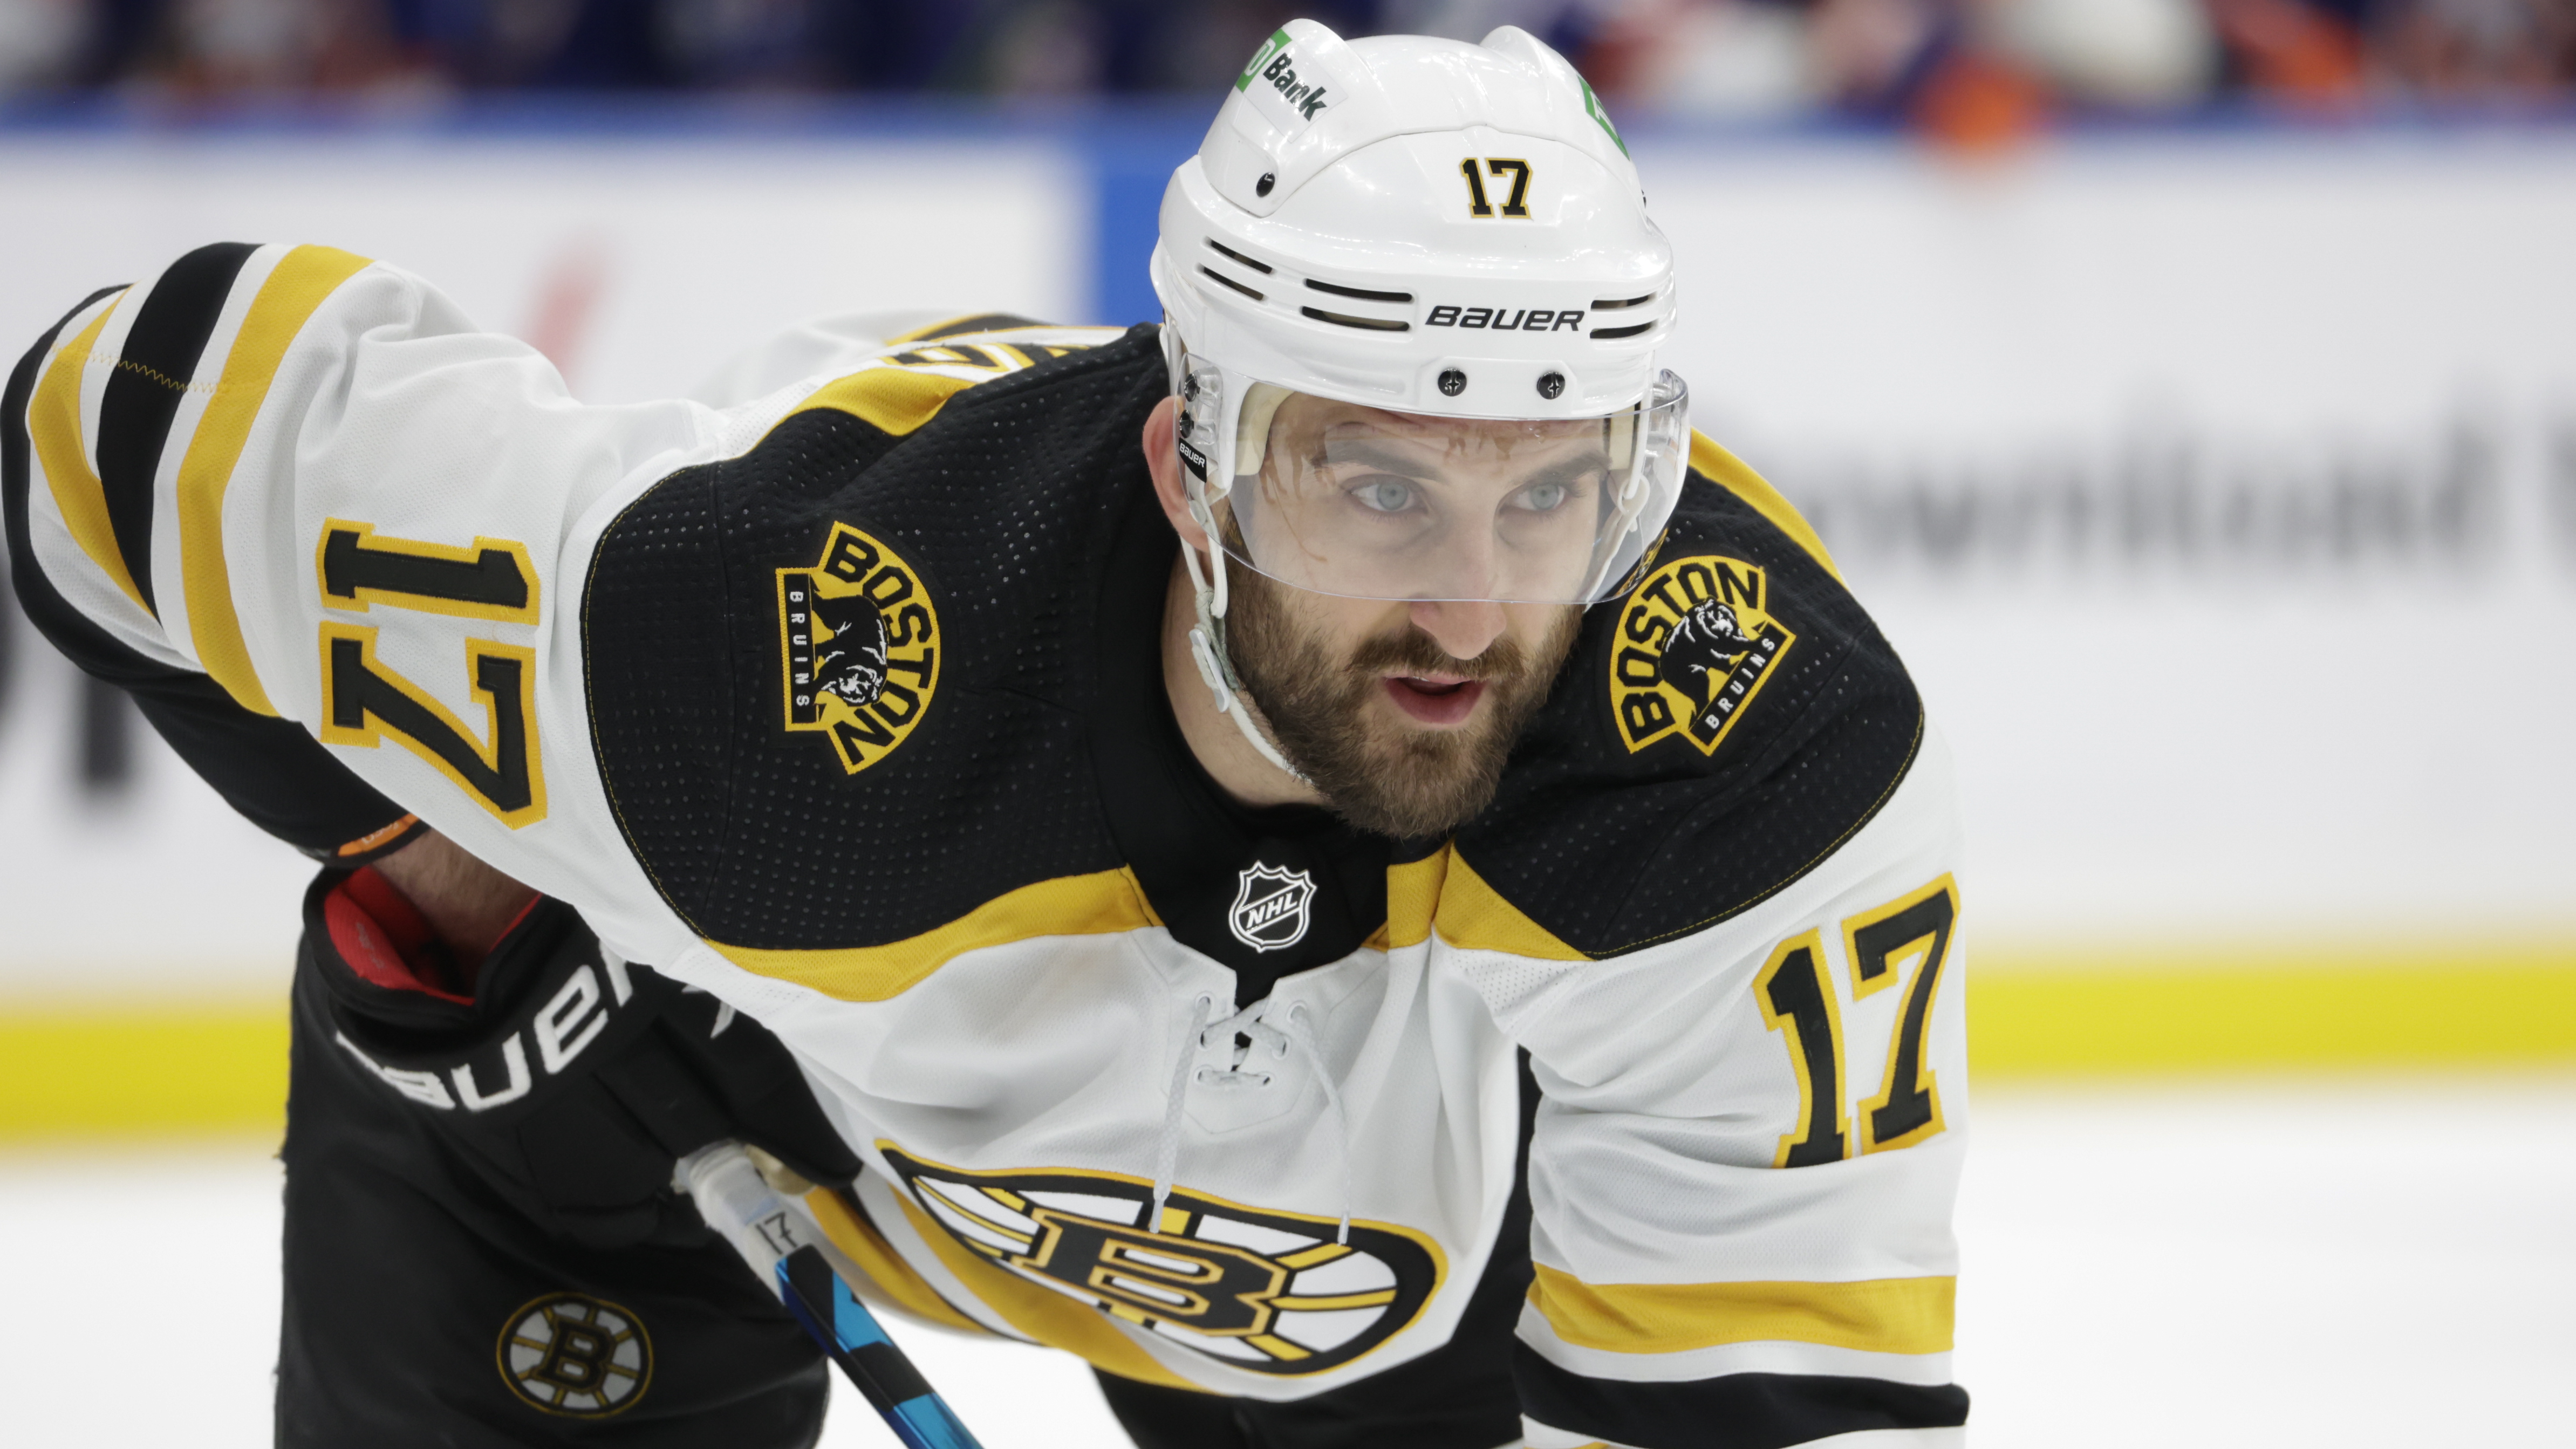 Haggs: Foligno 'Cherishes' First Winter Classic Experience with Bruins